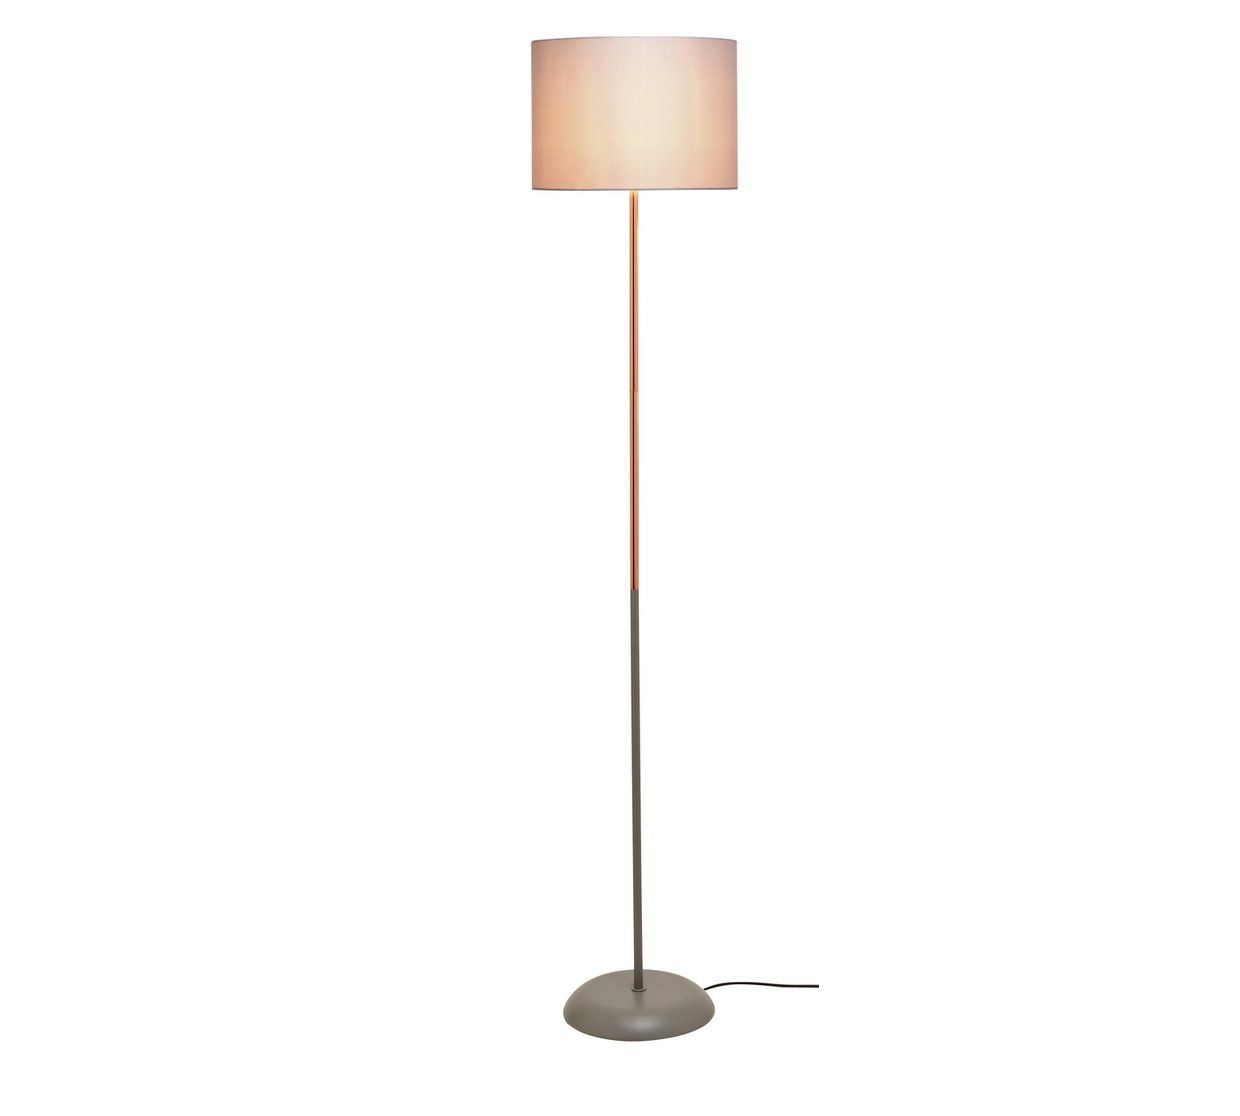 Home Duno Floor Lamp Grey Copper Woodhams Flat Copper pertaining to sizing 1240 X 1116